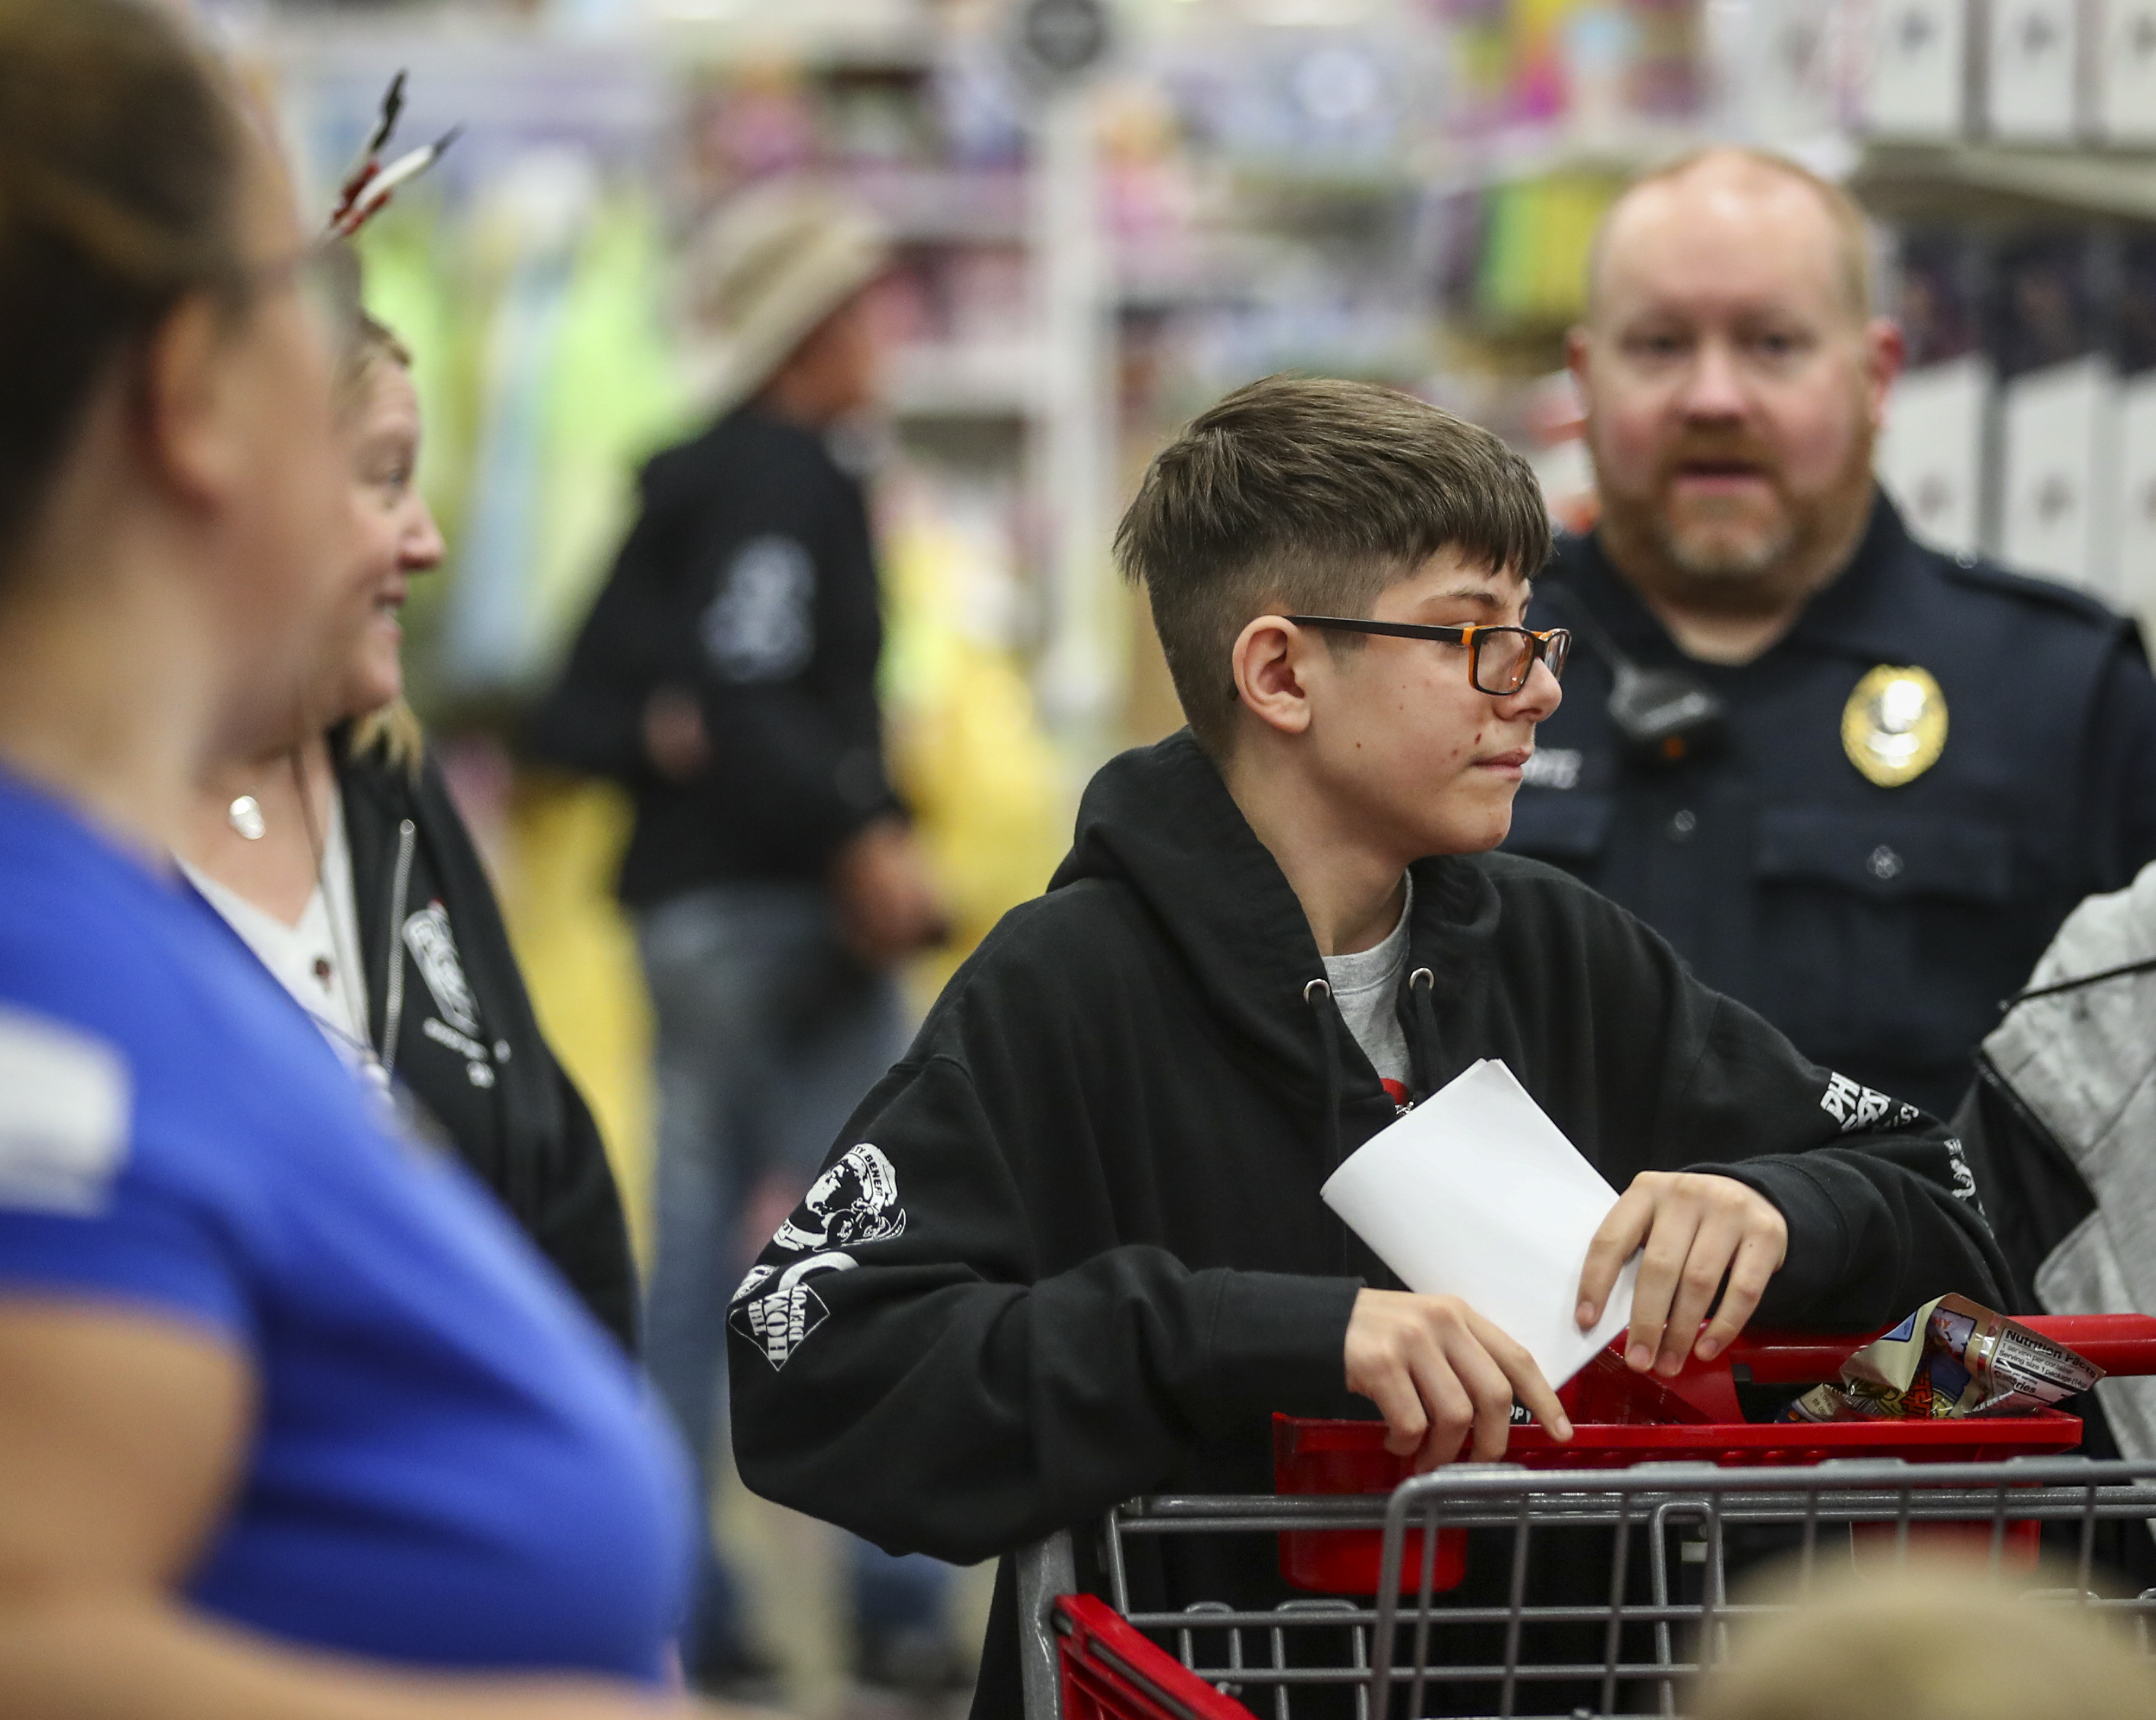 Gabriel Smith, 12, takes his time wandering the isles during a holiday shopping spree. He was among 22 children and their families from the Catasauqua Area School District who were accompanied by Lehigh-Northampton Airport Authority Police Department during the shopping spree Saturday, Dec. 3, 2022, at Target in Hanover Township, Lehigh County. 